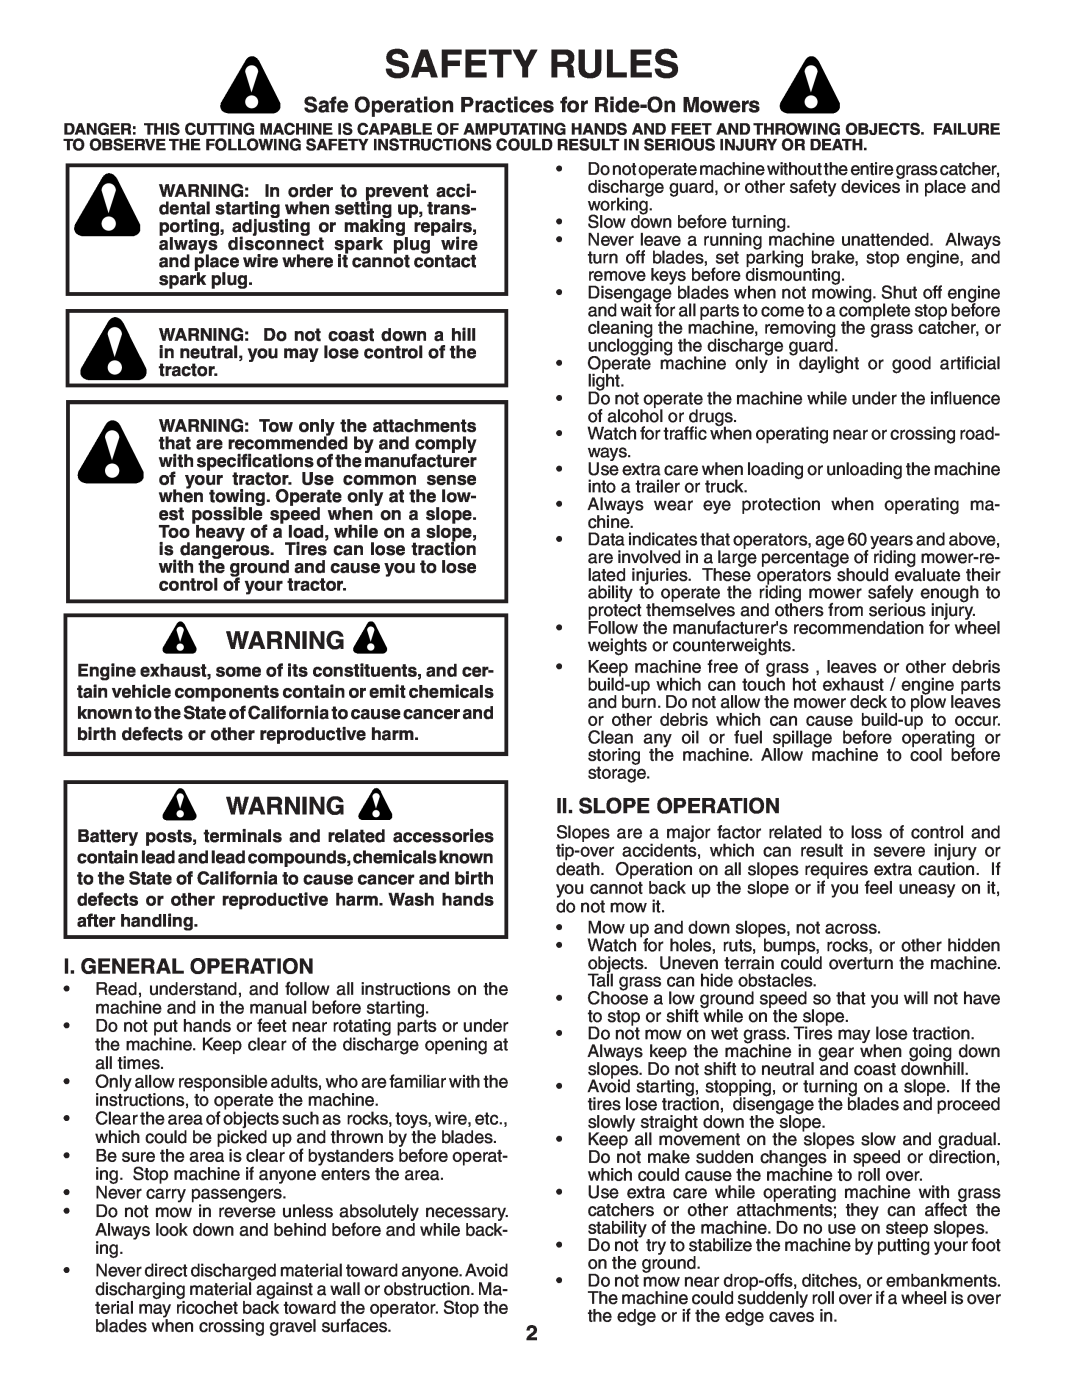 Poulan PB185H42LT Safety Rules, Safe Operation Practices for Ride-On Mowers, I. General Operation, Ii. Slope Operation 